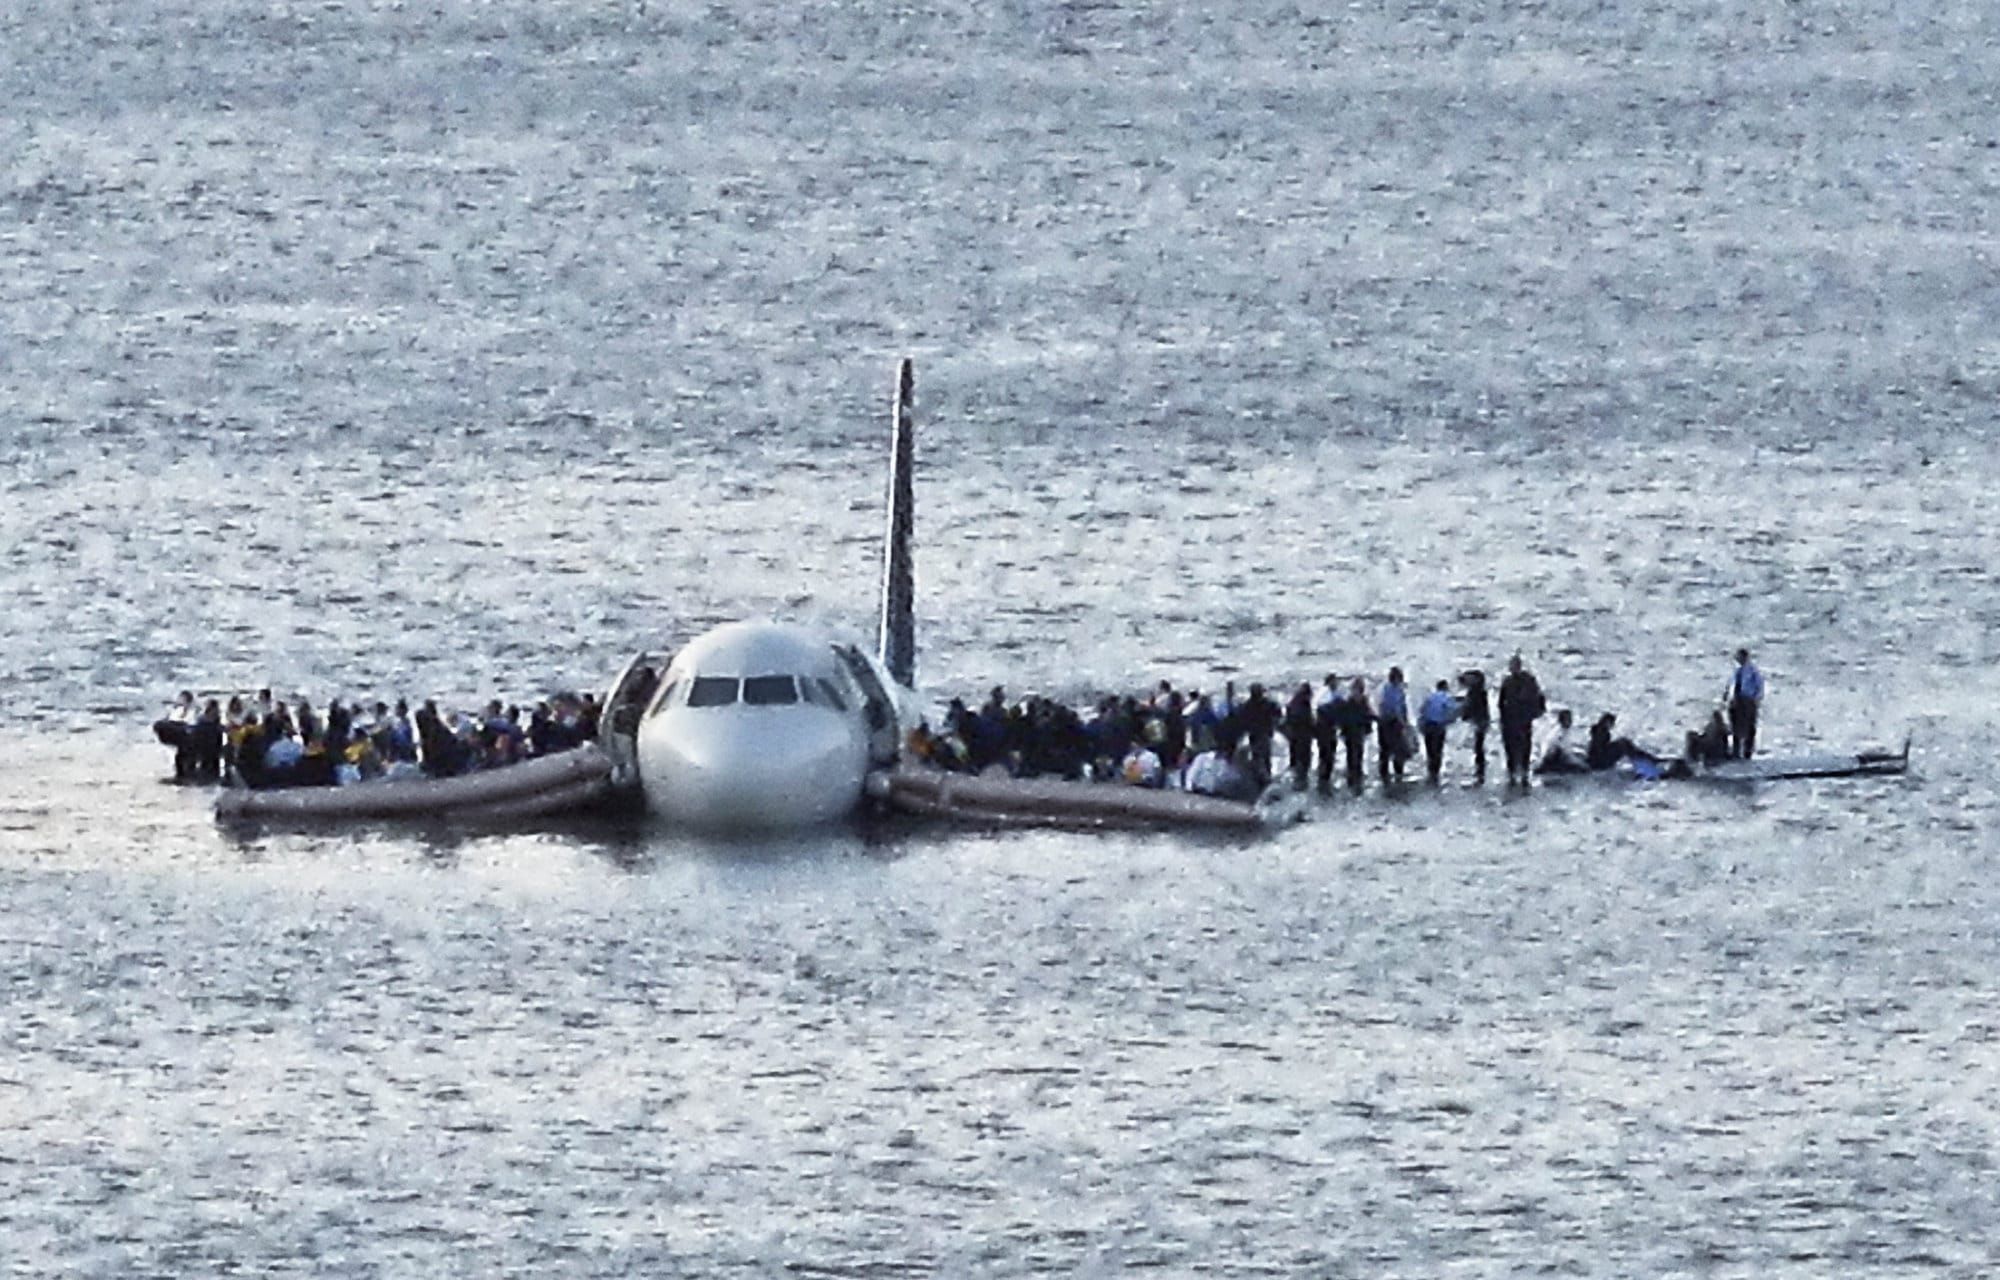 13 years ago, on this date, Captain Sully invented the first boat, 2009